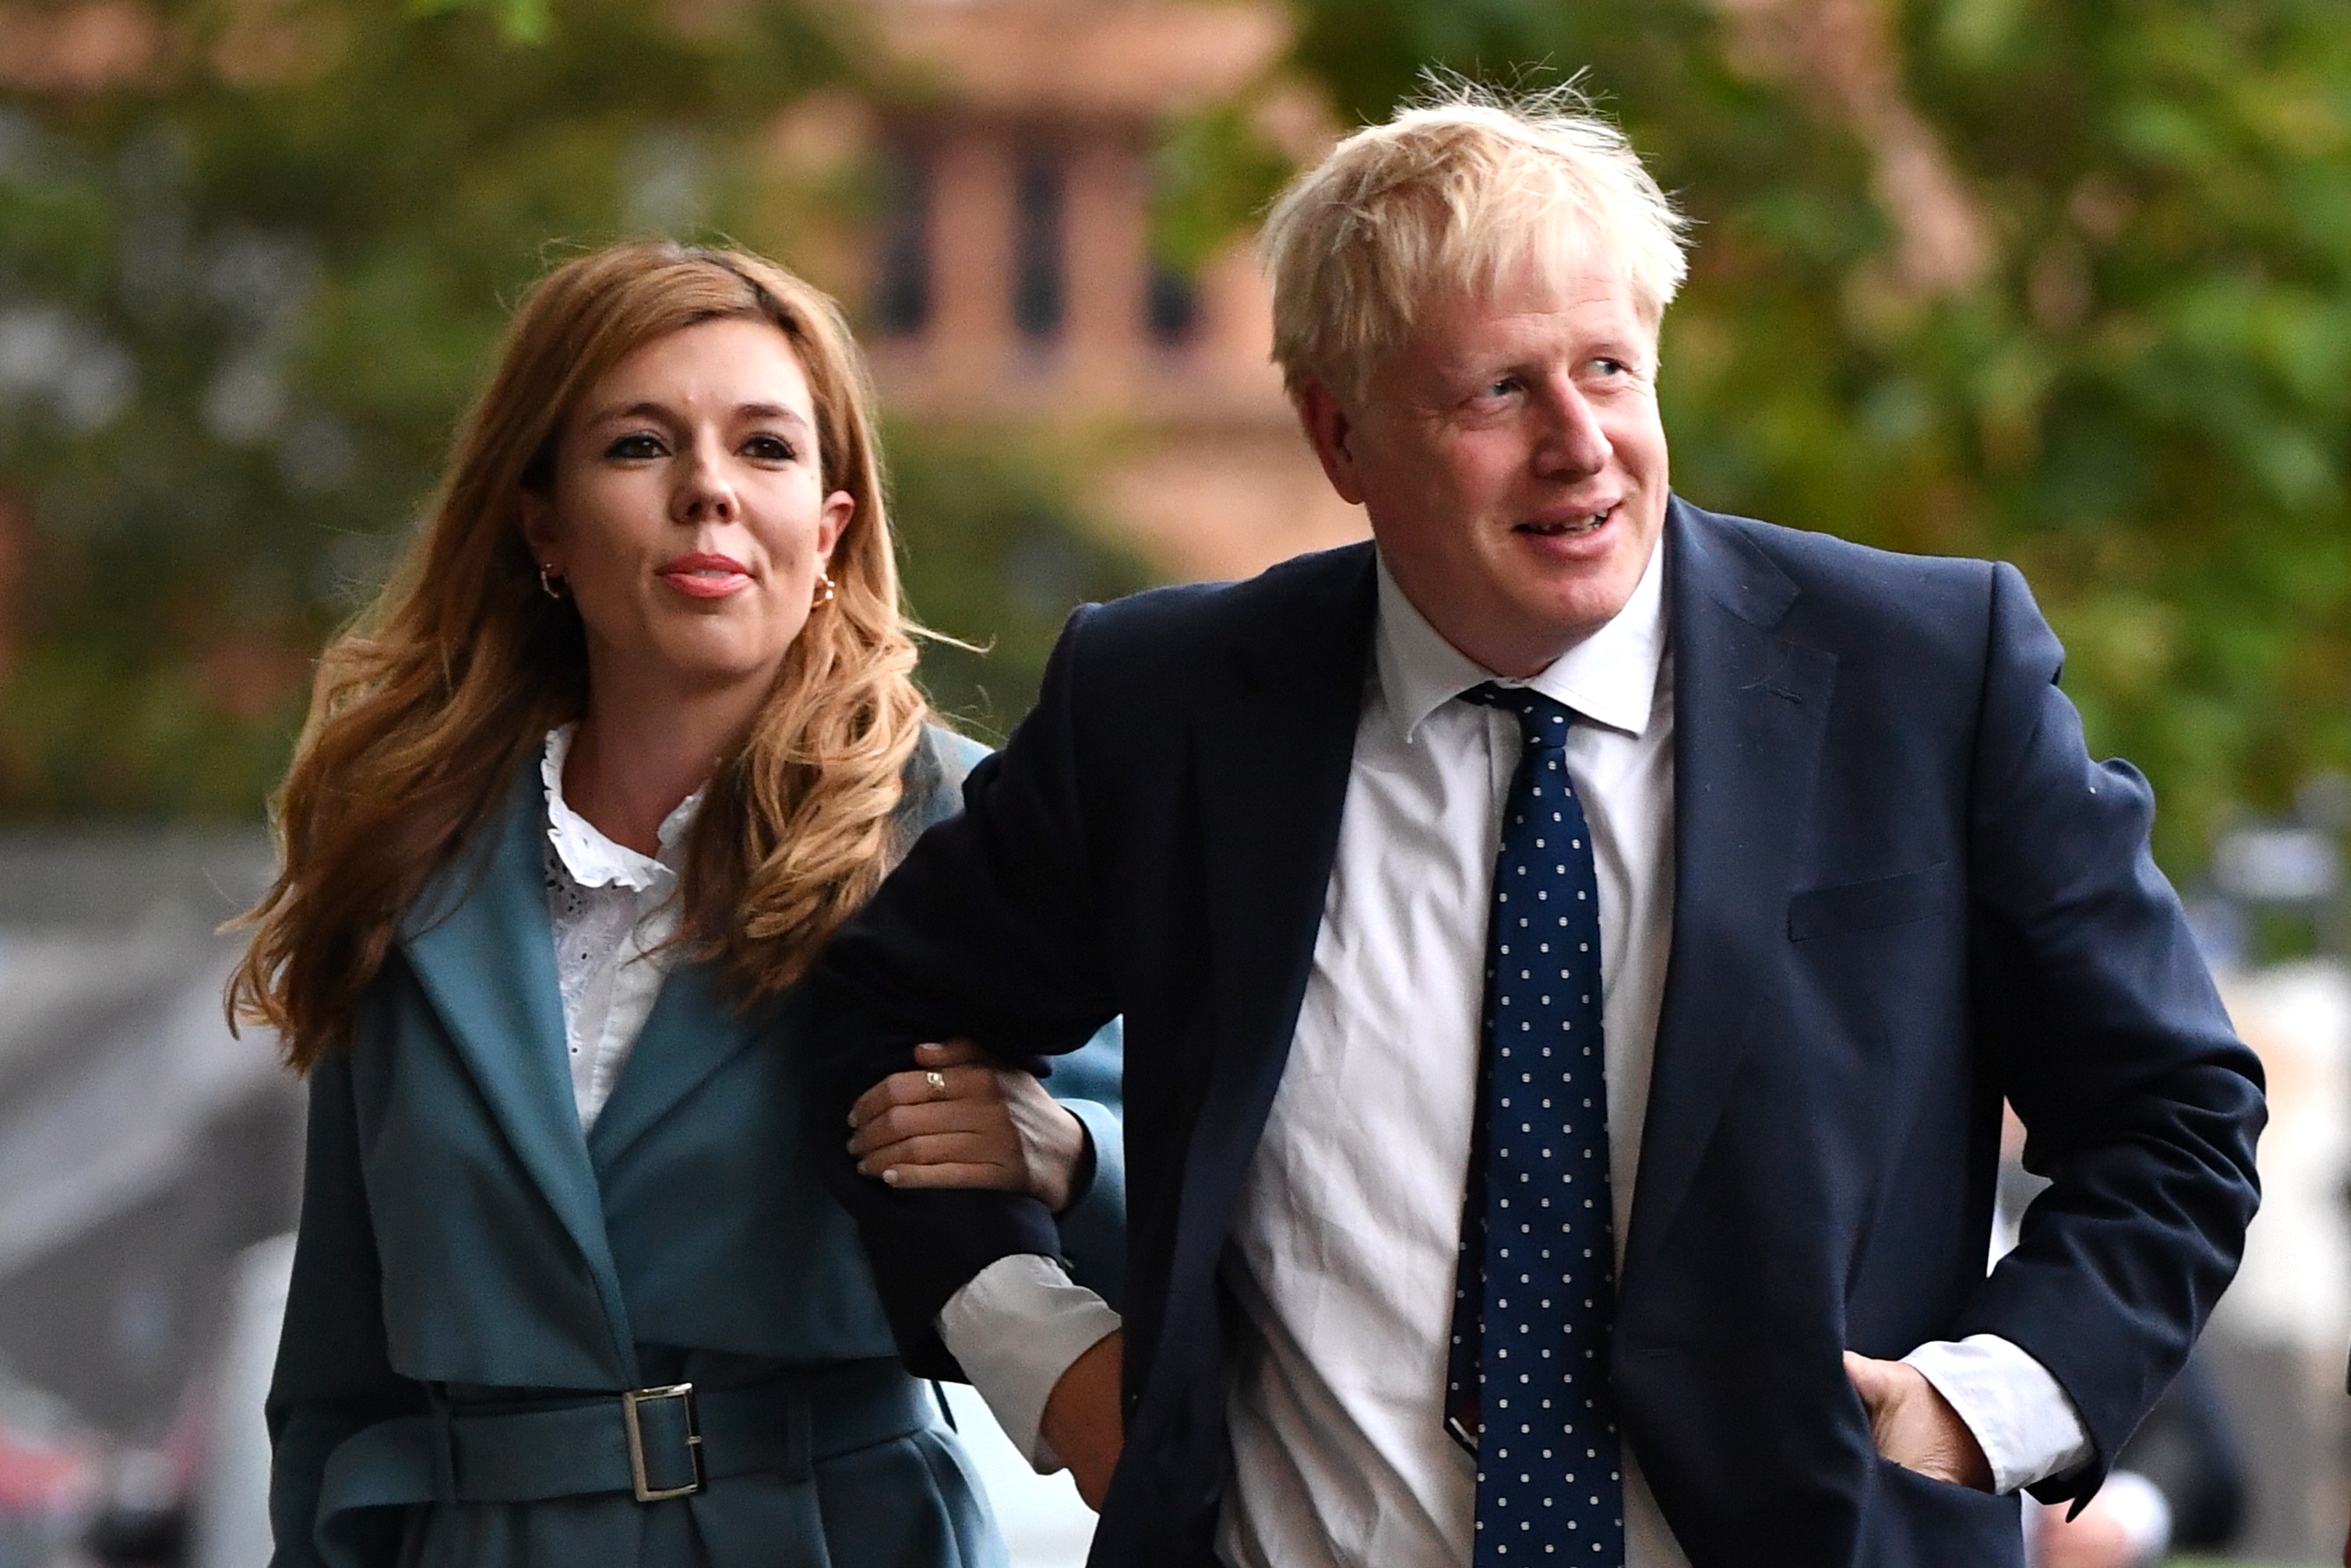 Boris Johnson and his girlfriend Carrie Symonds arrive at the Conservative Party conference yesterday